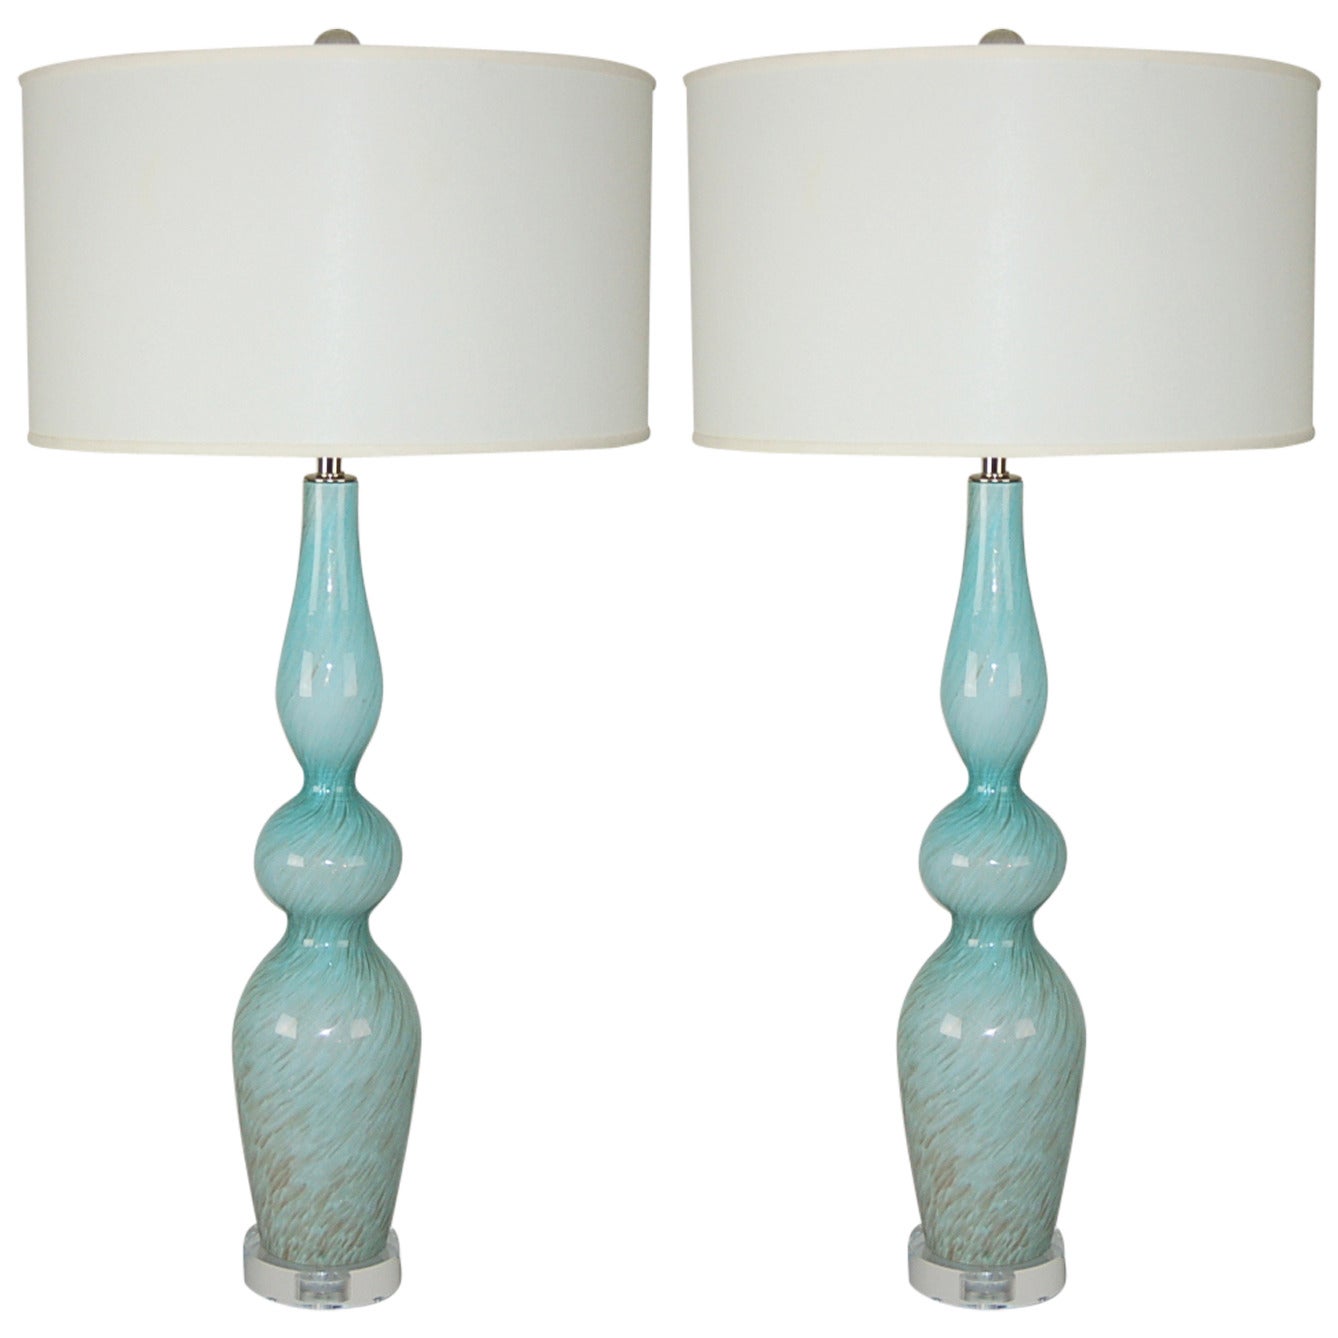 Sexy Pair of Vintage Murano Sky Blue Lamps with Swirls of Bronze